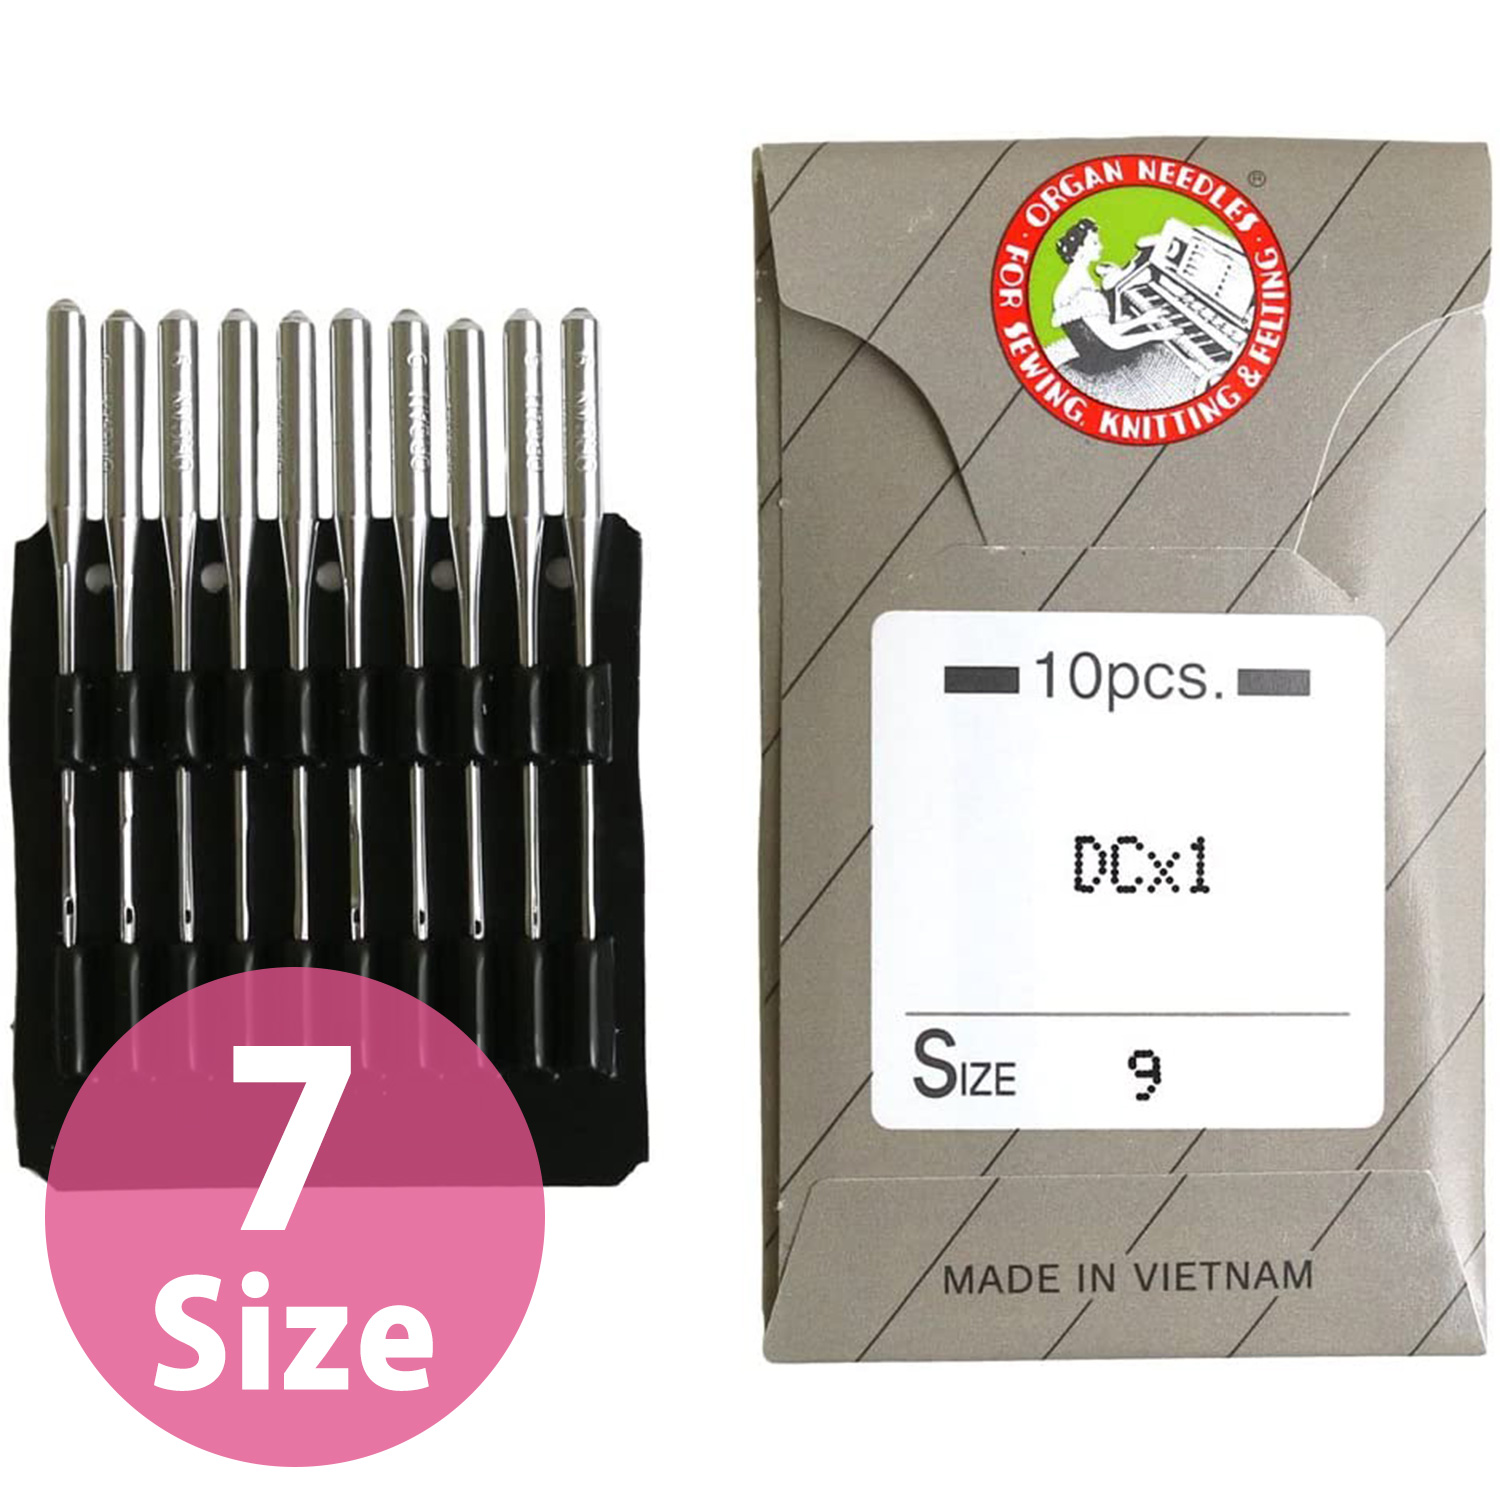 Special Machine Needles, for industrial use, 10pcs (pcs)